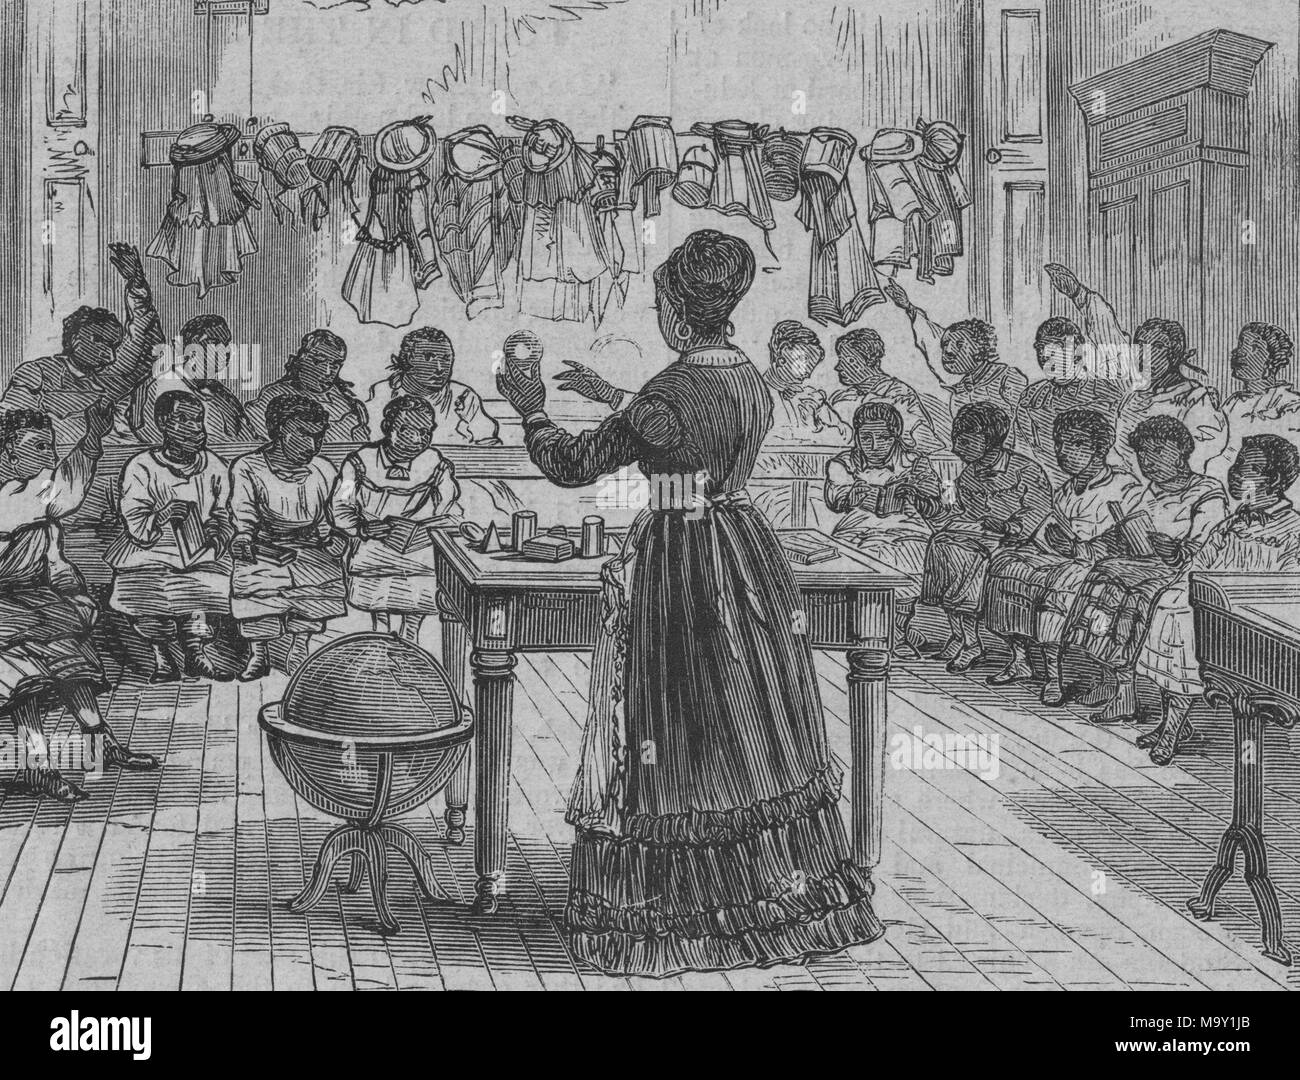 Illustration from journal article describing early African-American school in the American South, 1870. From the New York Public Library. () Stock Photo